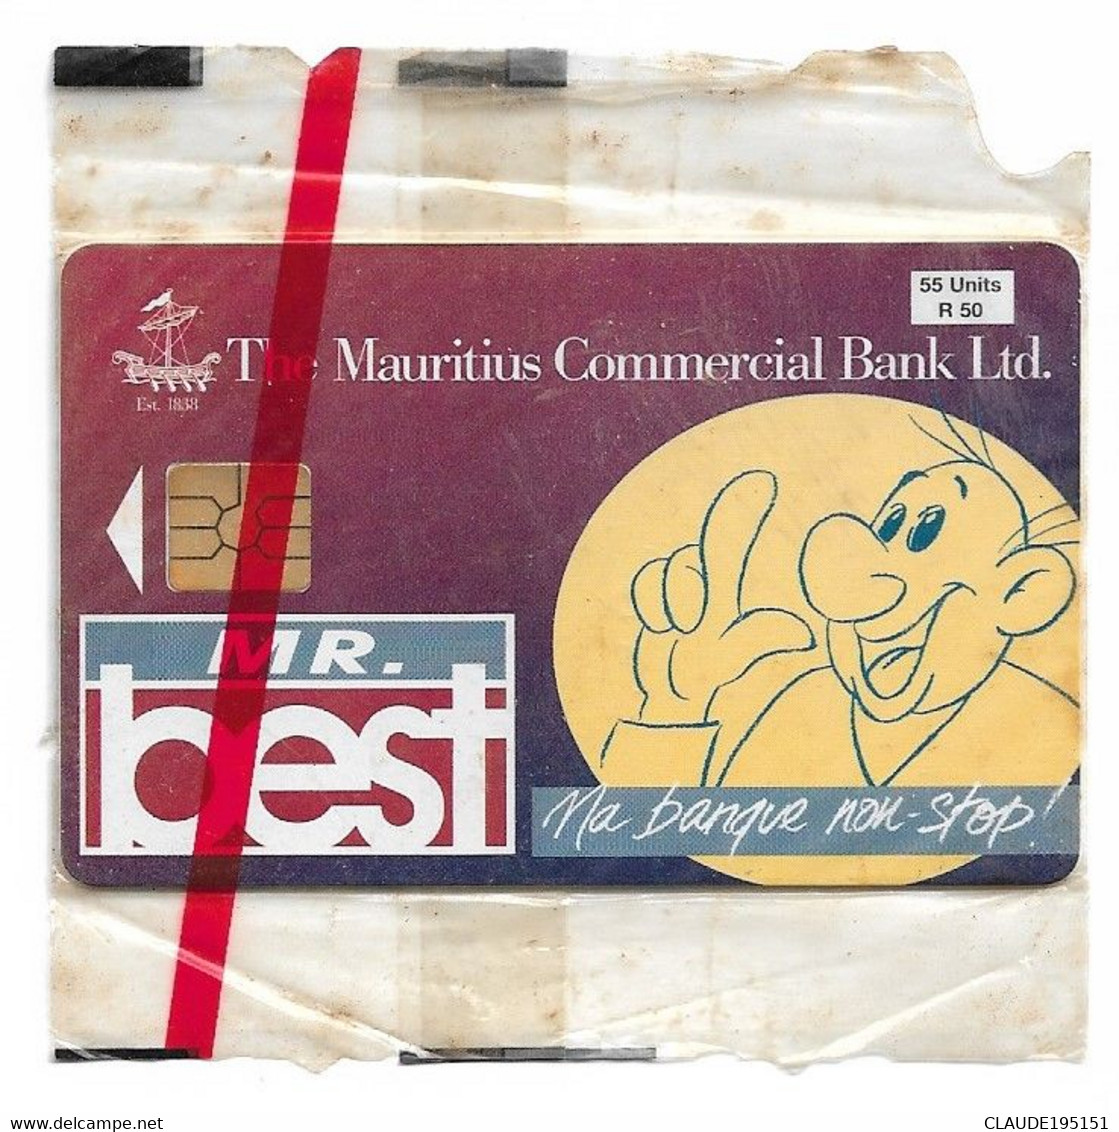 THE MAURITIUS COMMERCIAL BANK LTD   55 UNITS   R50 - Maurice